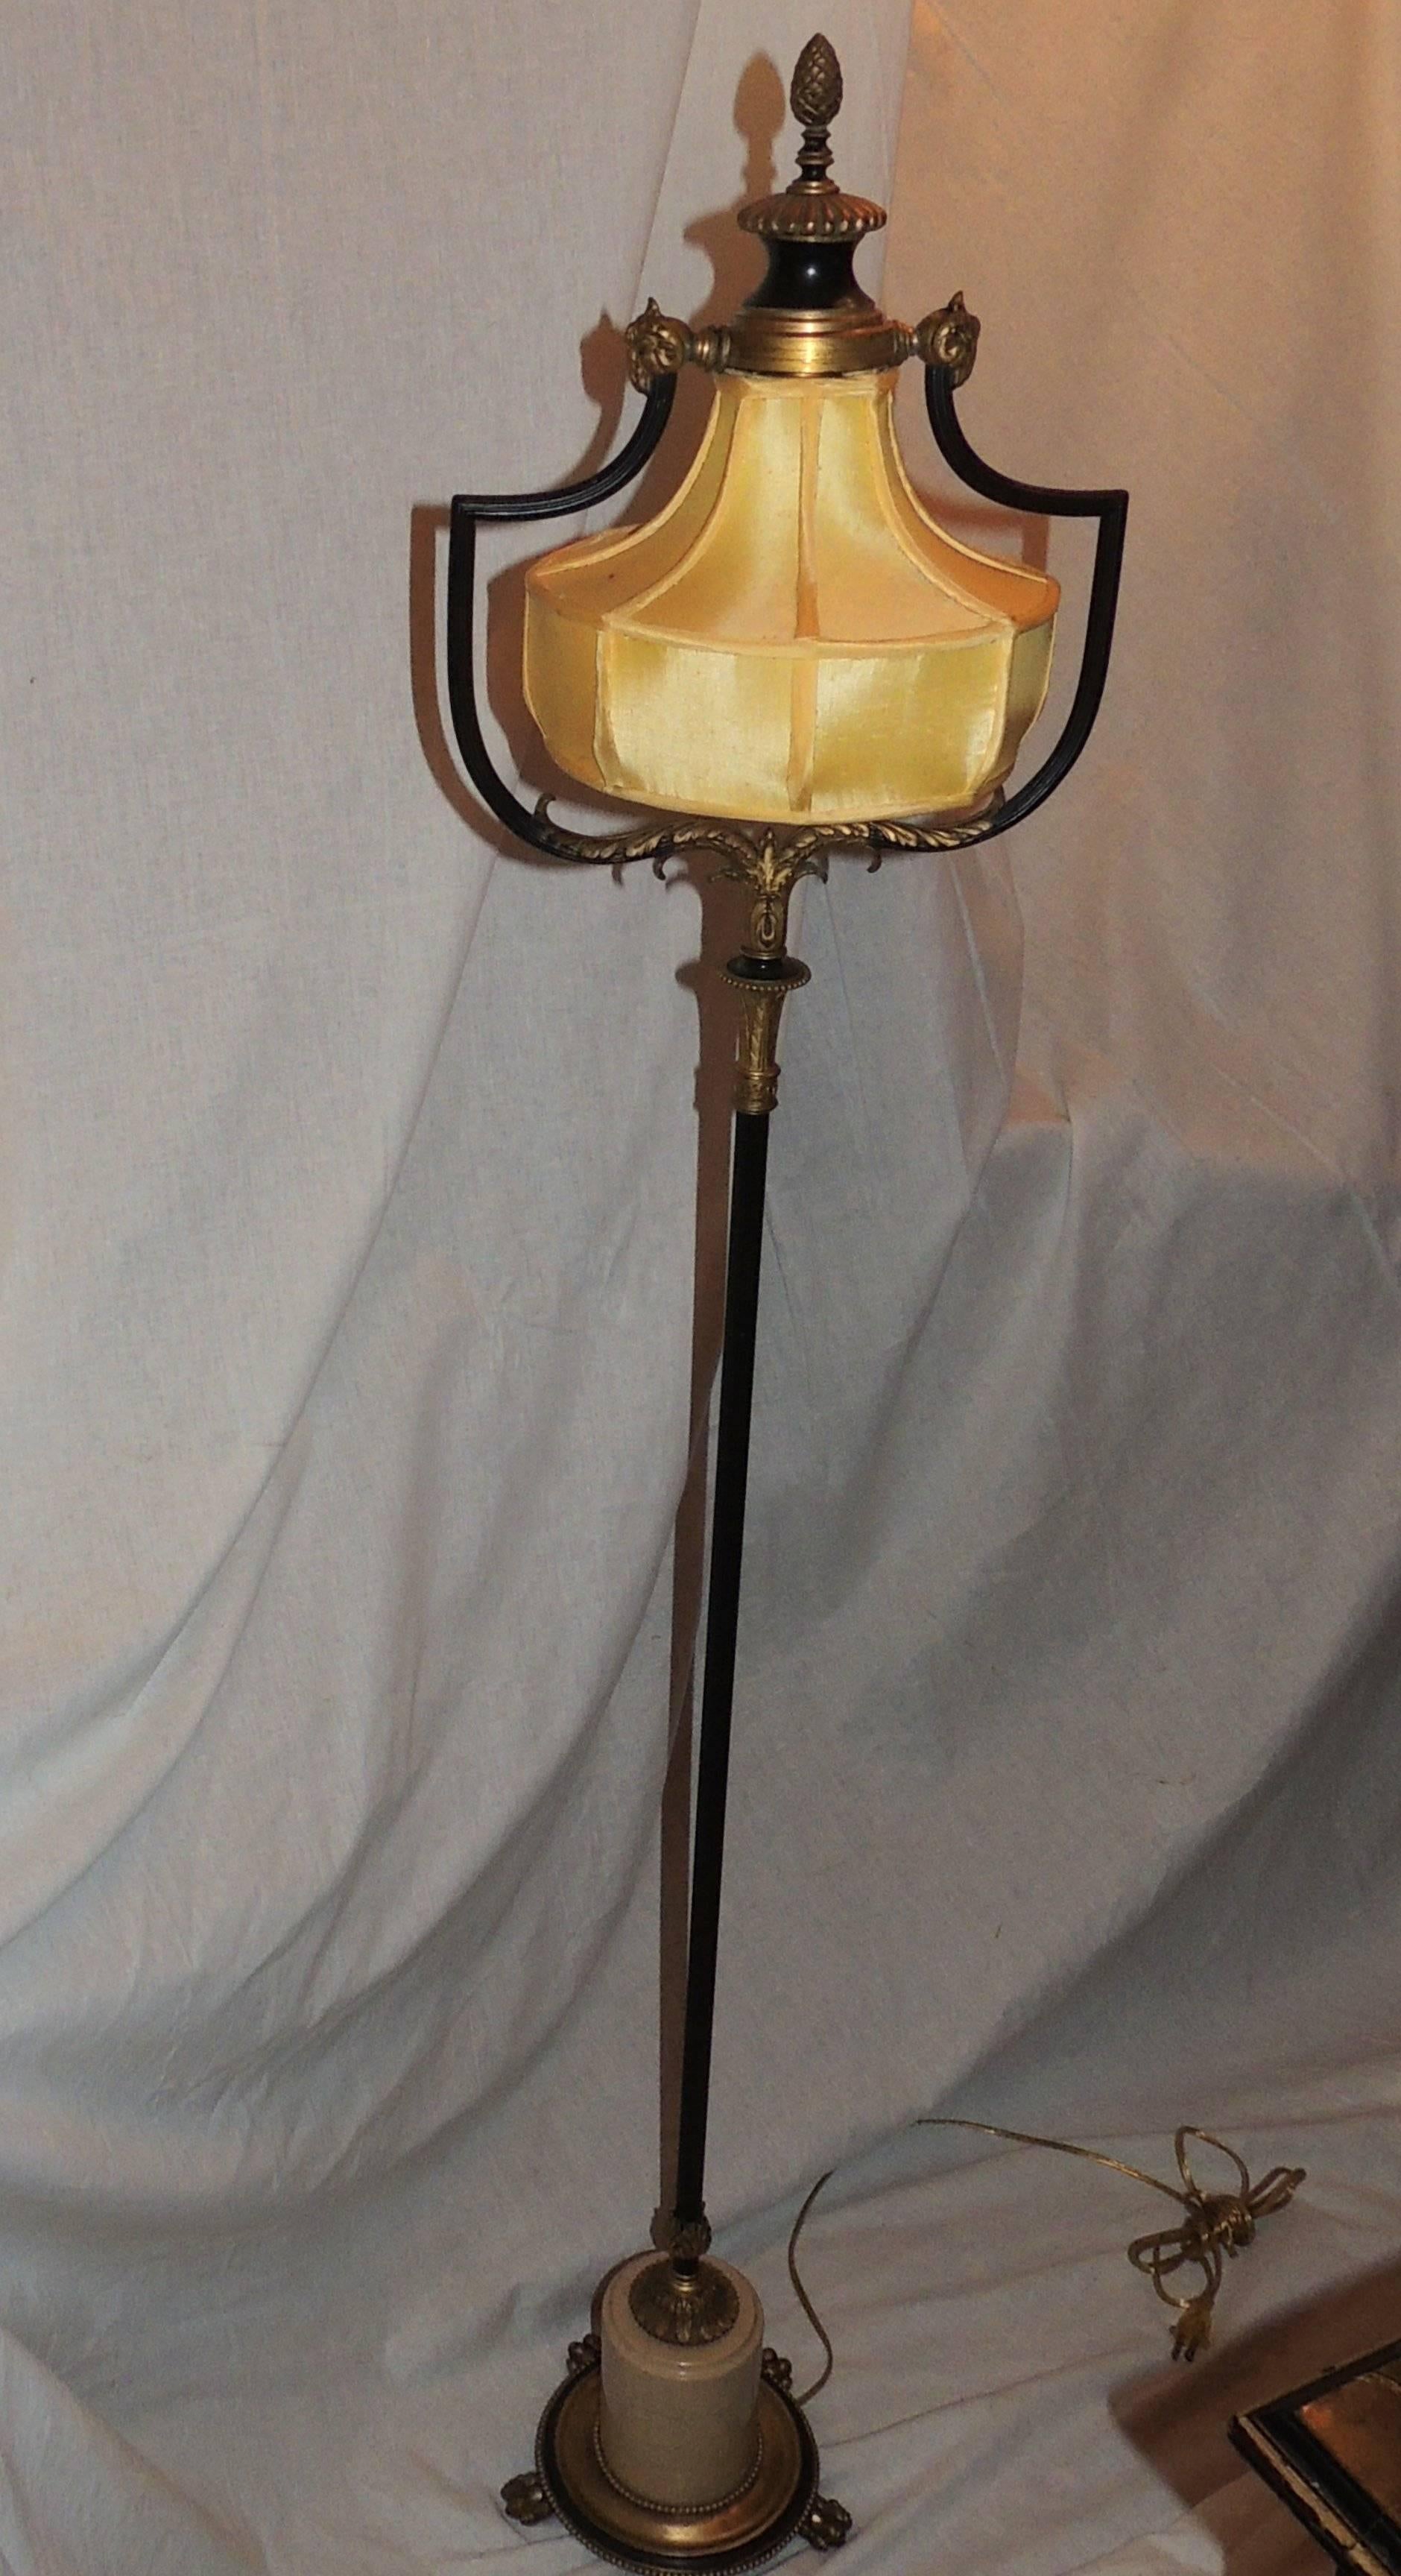 A wonderful neoclassical patinated gilt bronze Caldwell floor lamp silk shade set with marble and finished with bronze claw feet
Rewired and ready to enjoy.

Measures: 12" W x 58" H.